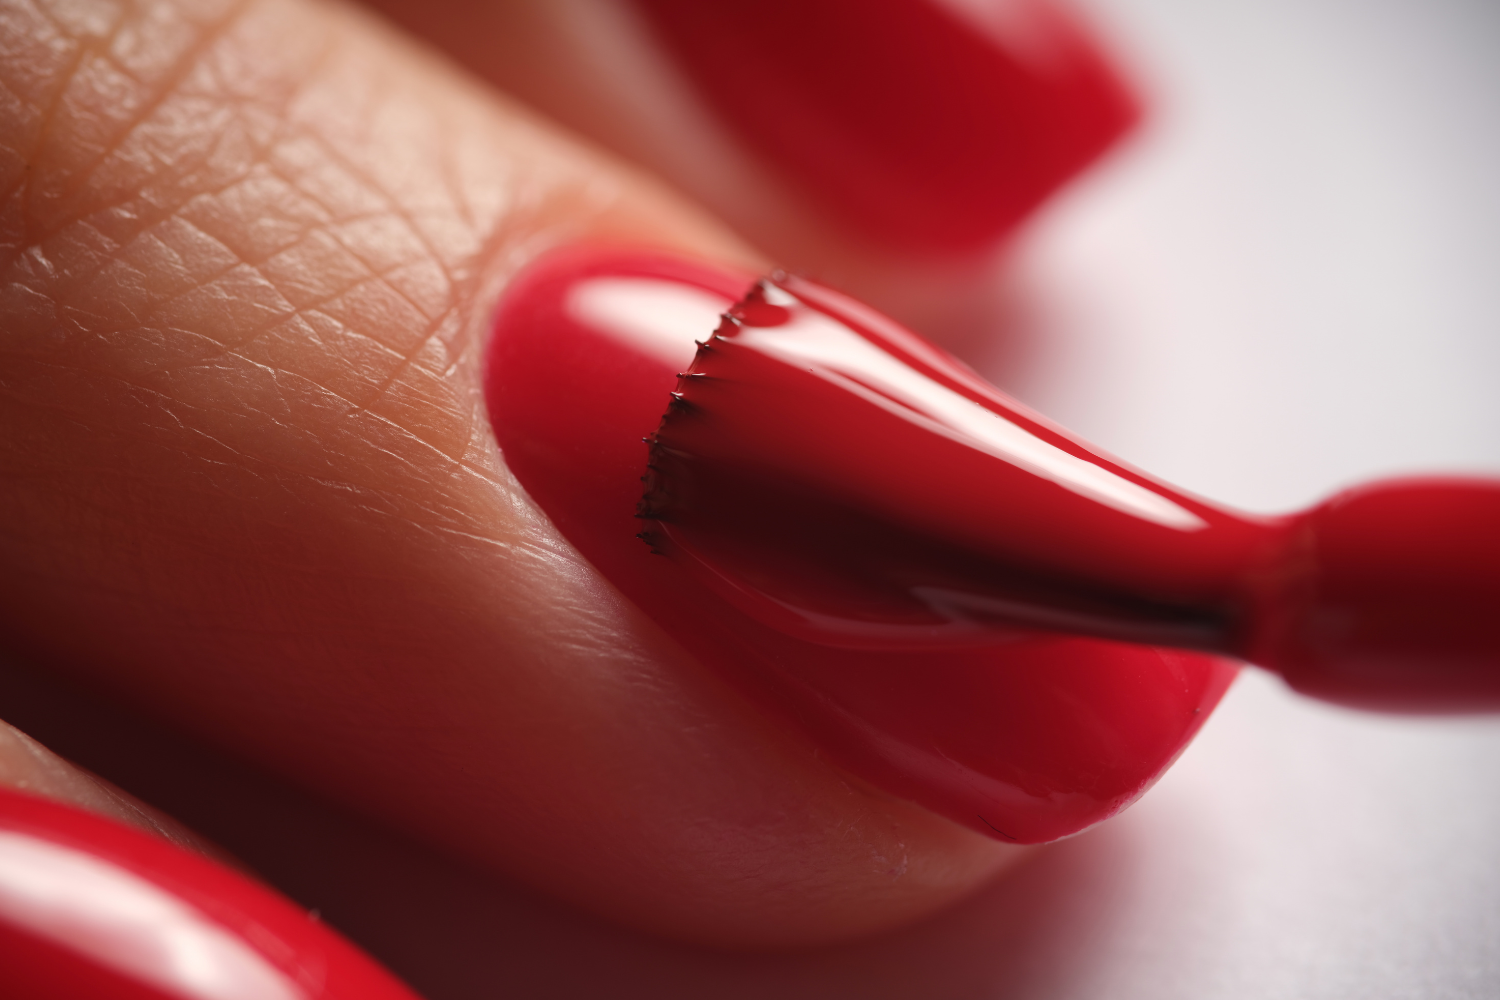 Need You Nail Polish to Dry Fast? Follow These Great Tips! – callycosmetics